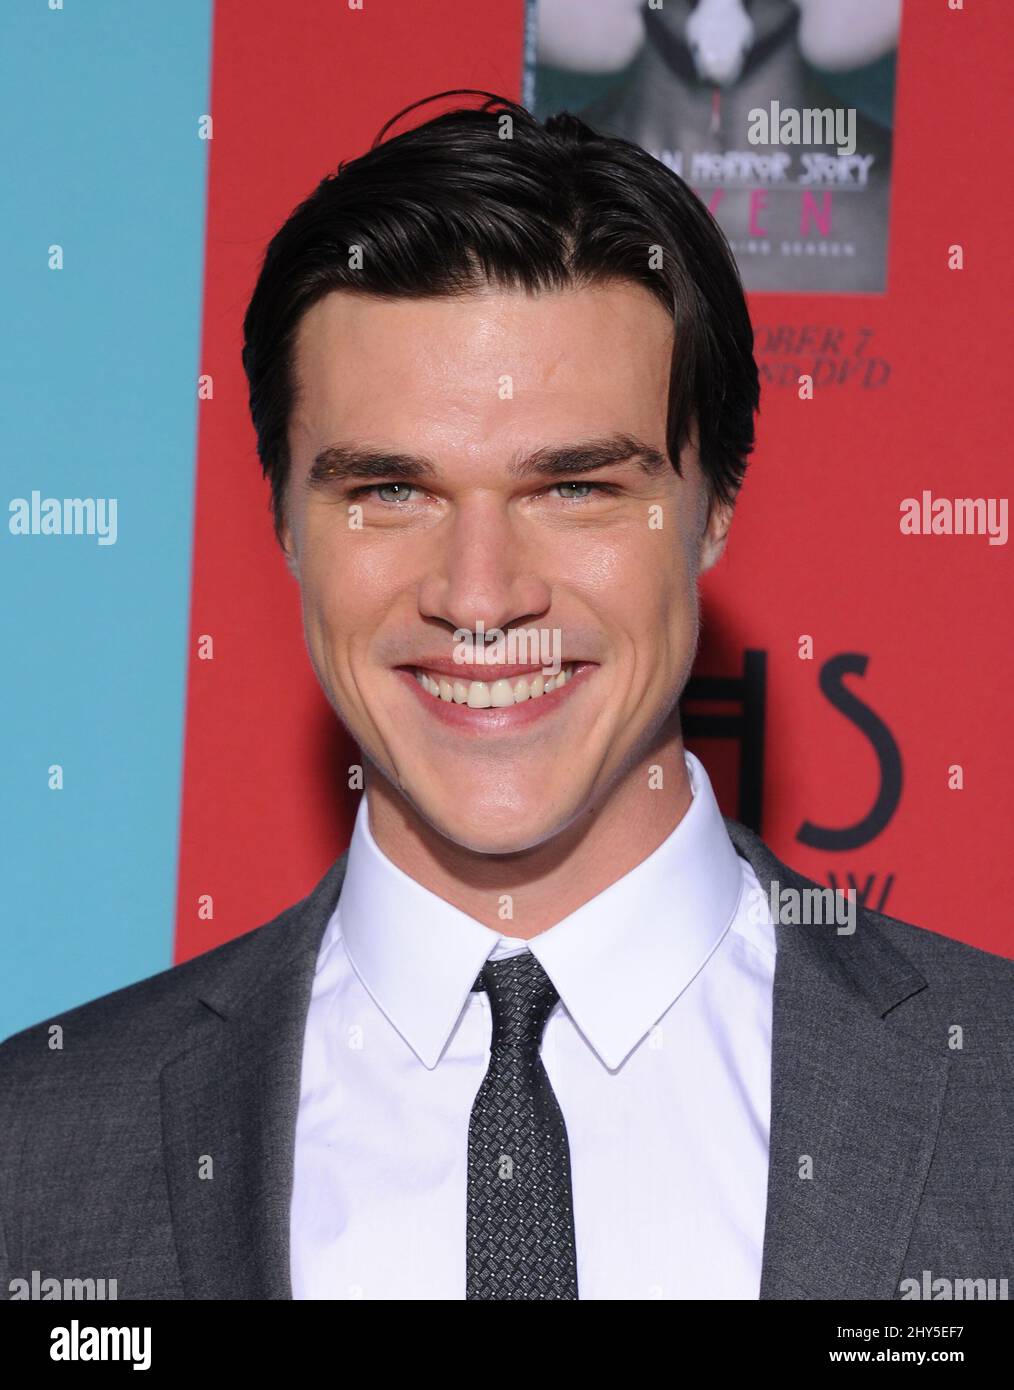 Finn Wittrock attends the 'American Horror Story: Freak Show' Season Premiere at the Chinese Theatre Stock Photo